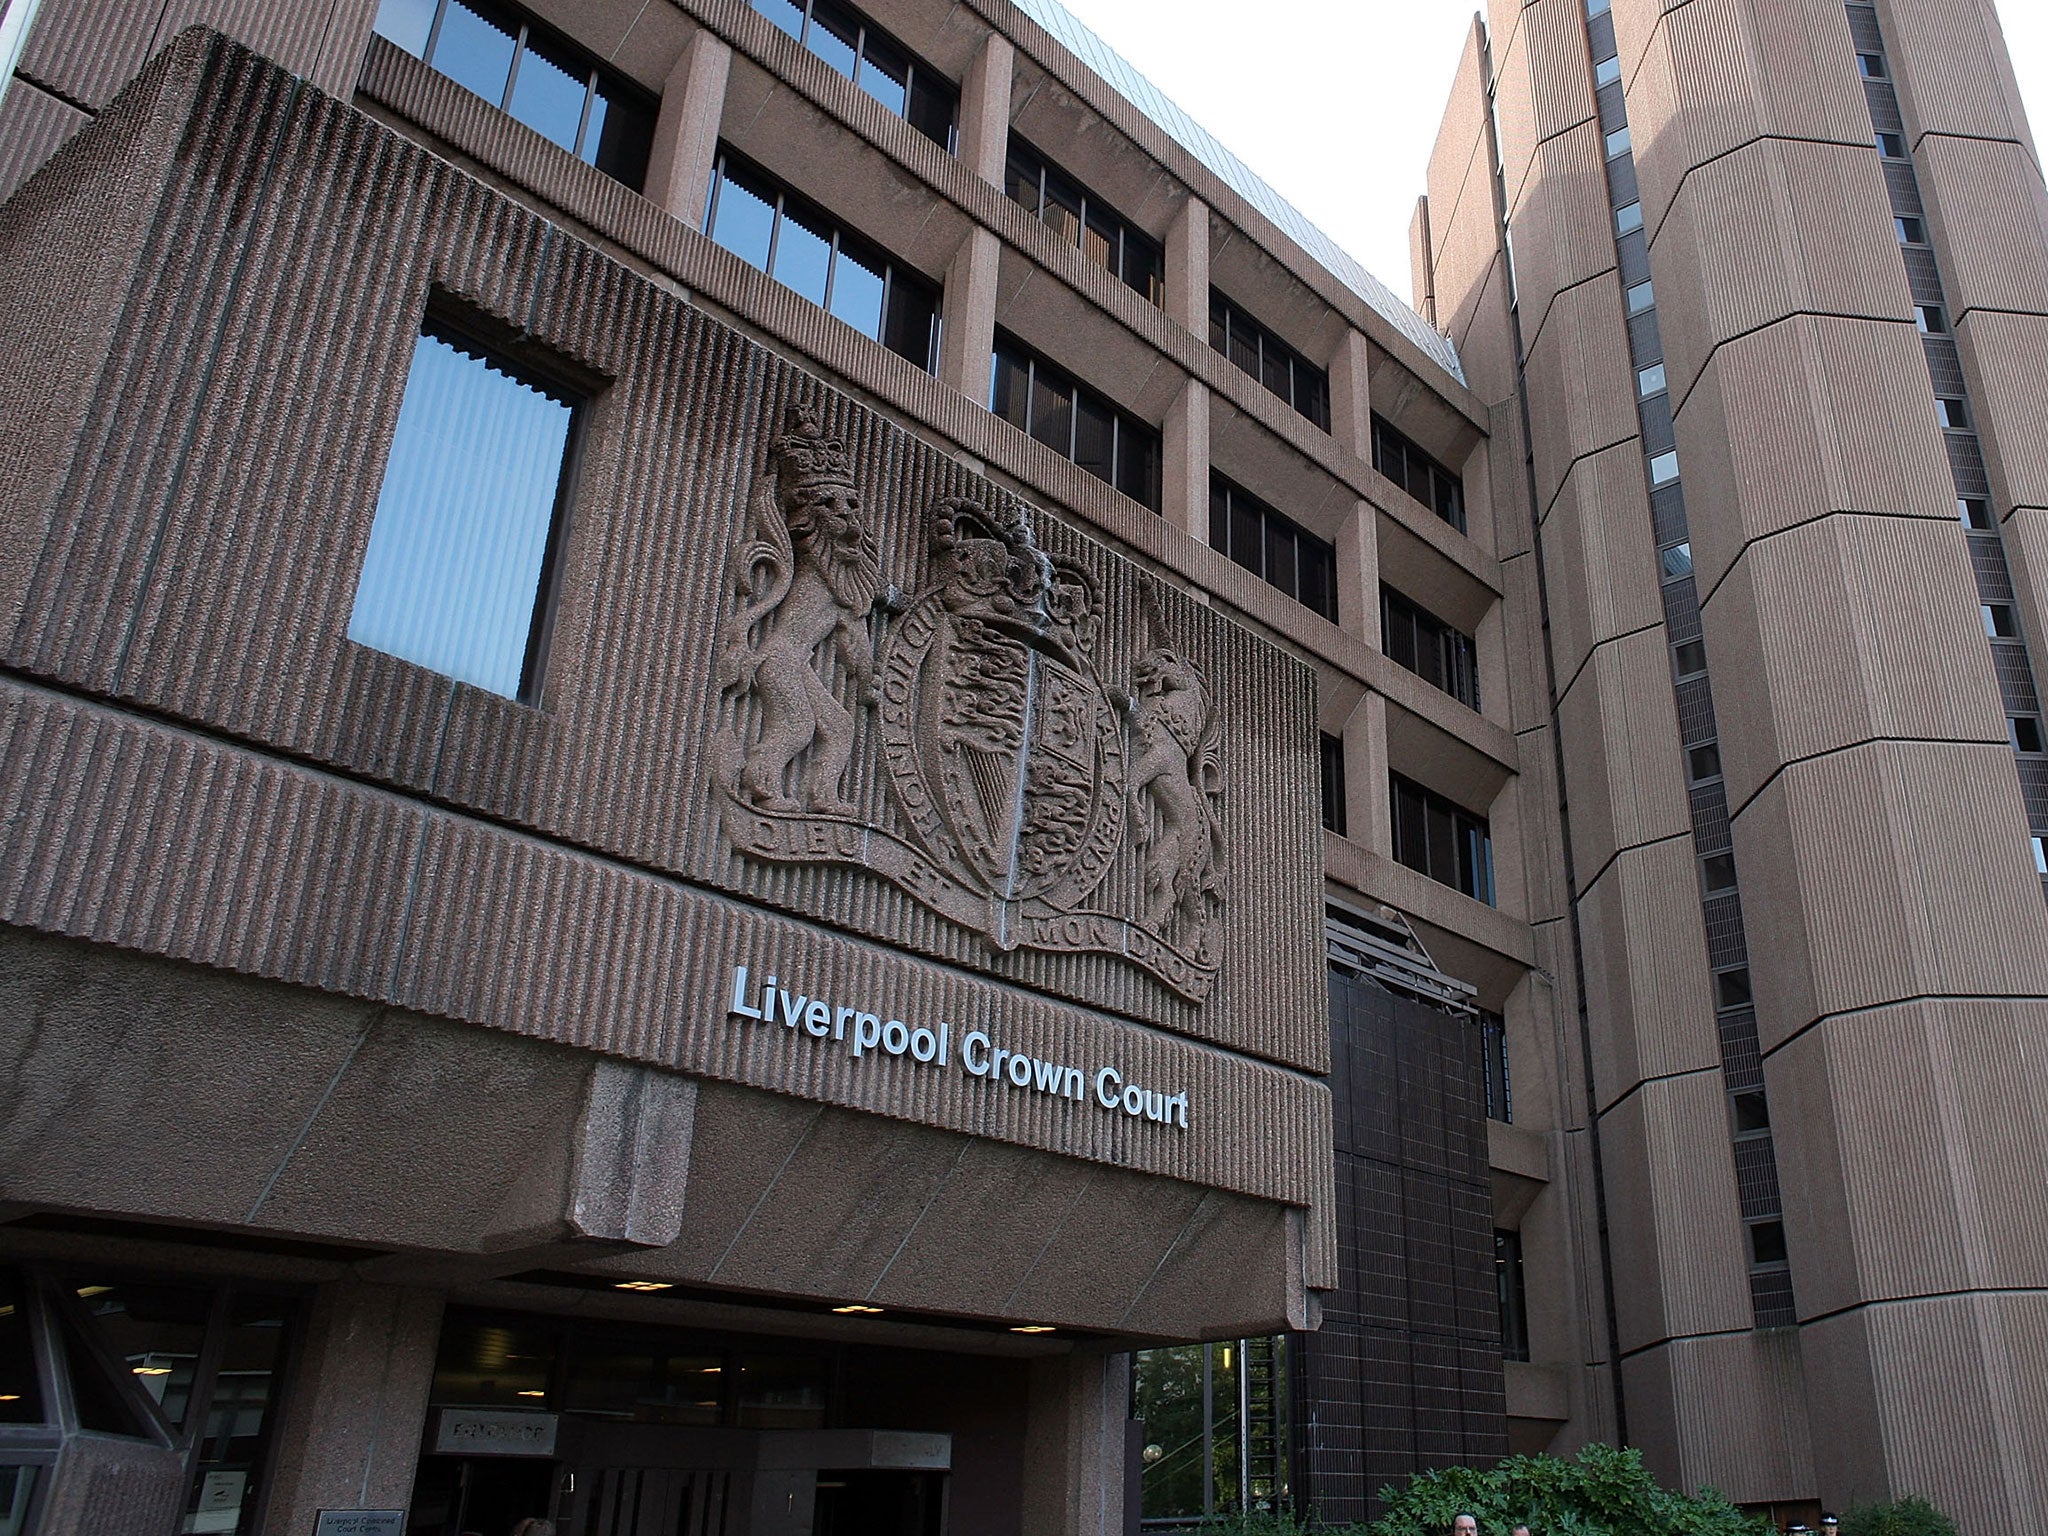 Mark Mahoney changed his plea to guilty the day before his trial was due to begin at Liverpool Crown Court